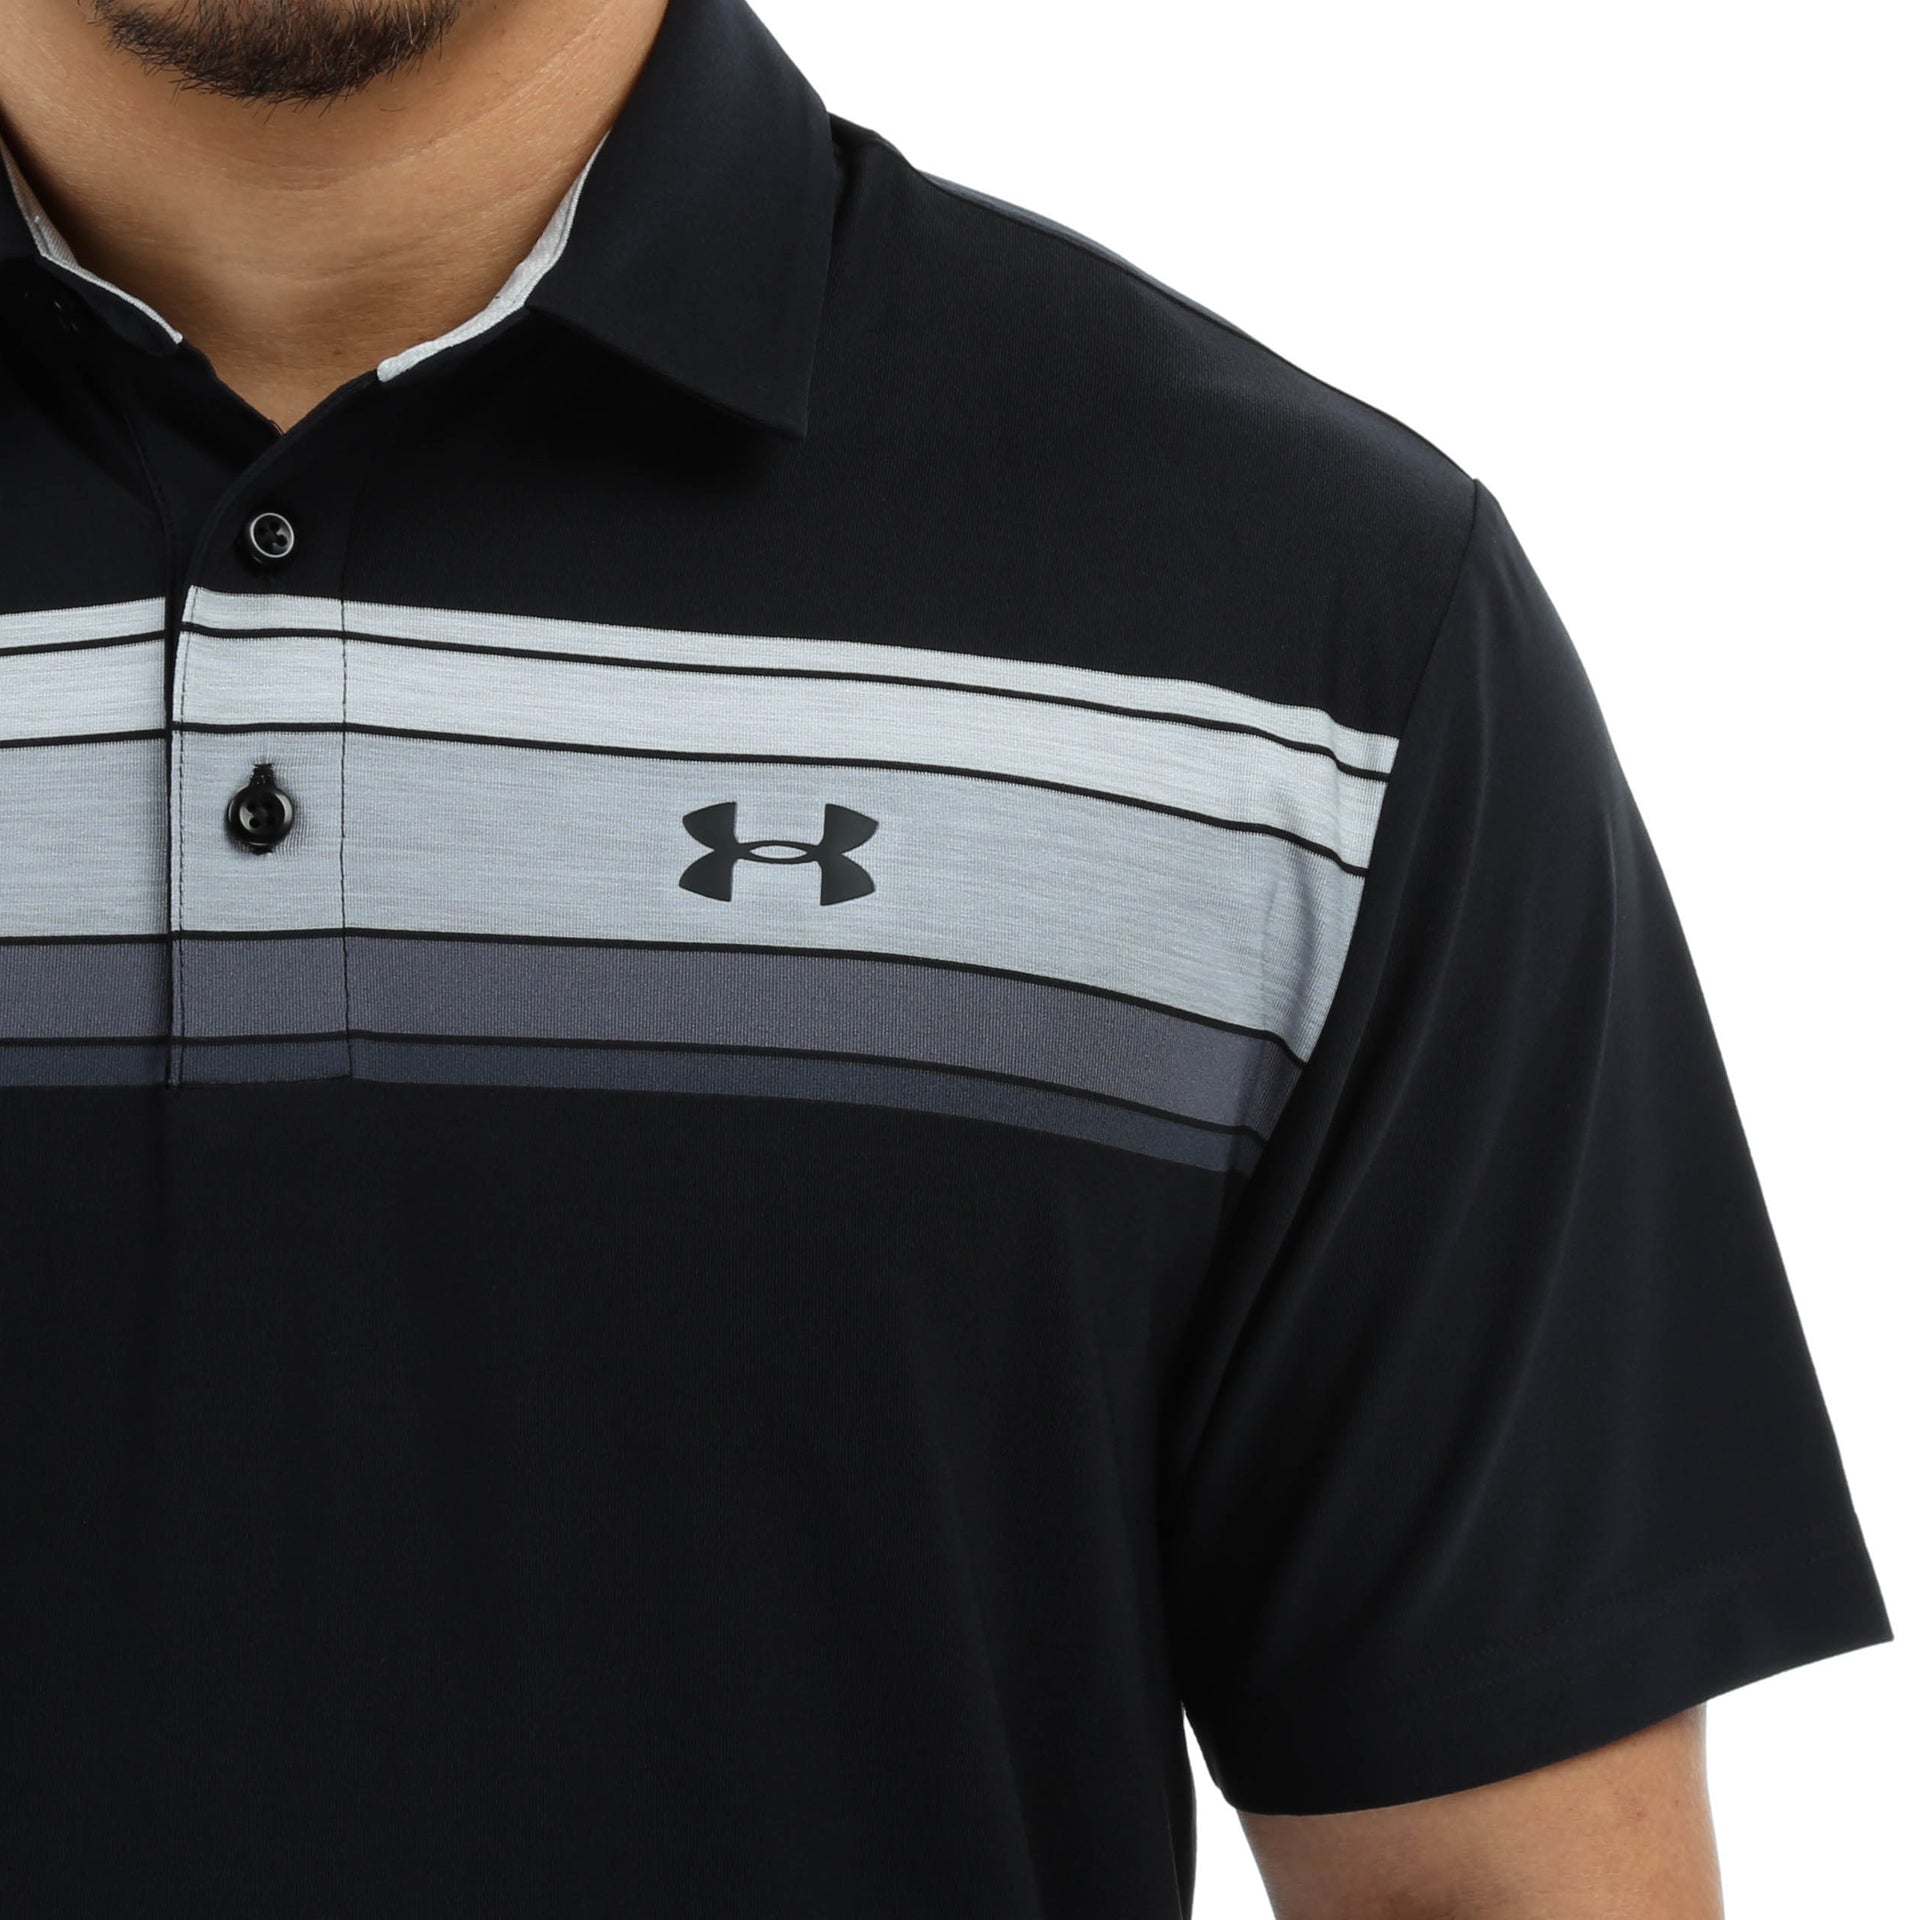 Under Armour Playoff Short Sleeve Polo Womens